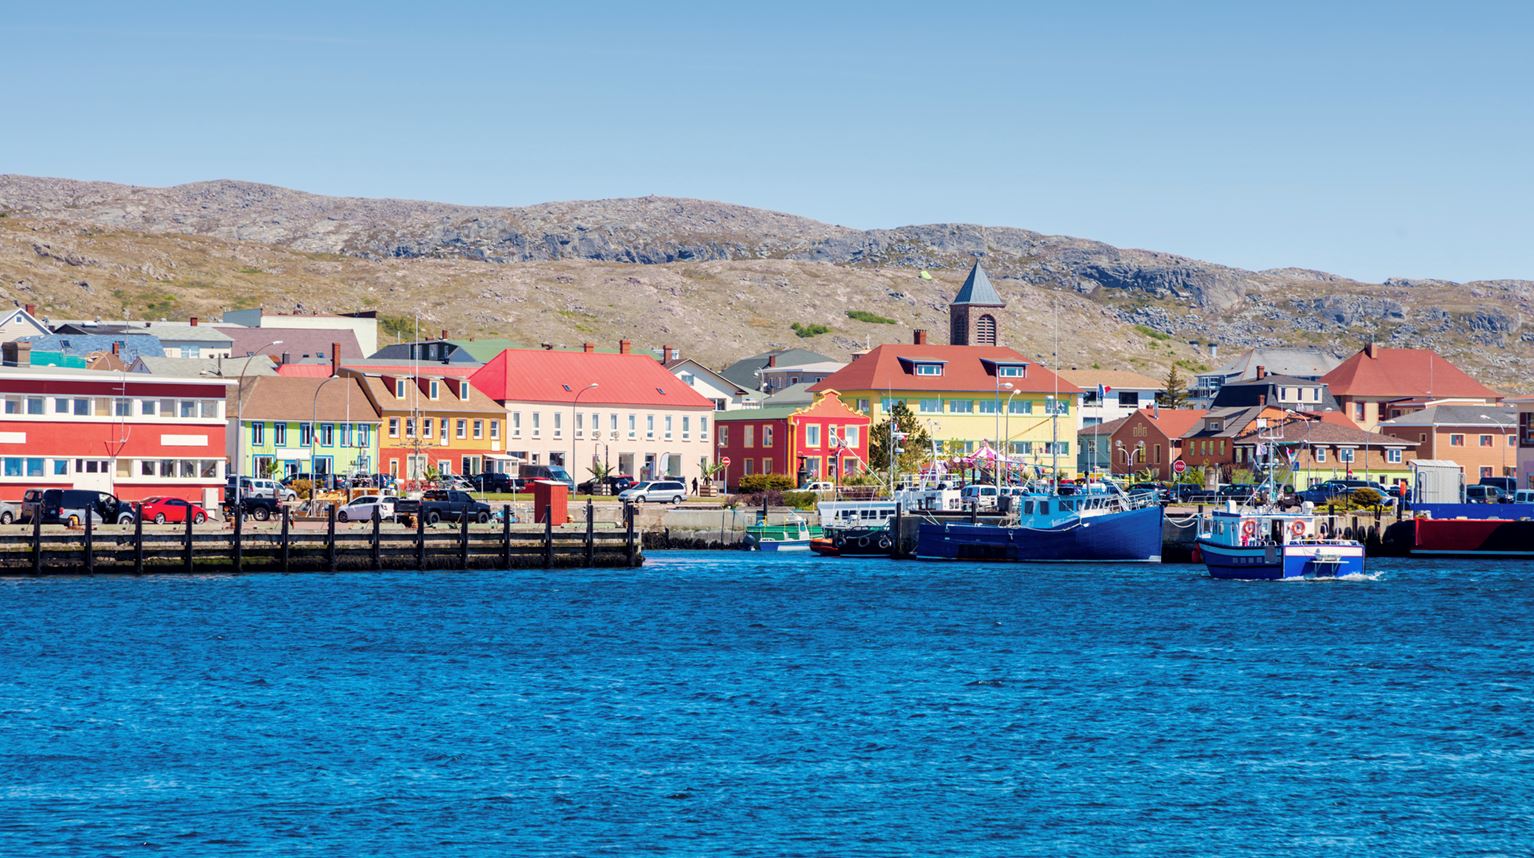 Water view of a small town with colourful houses and boats, Saint Pierre and Miquelon.